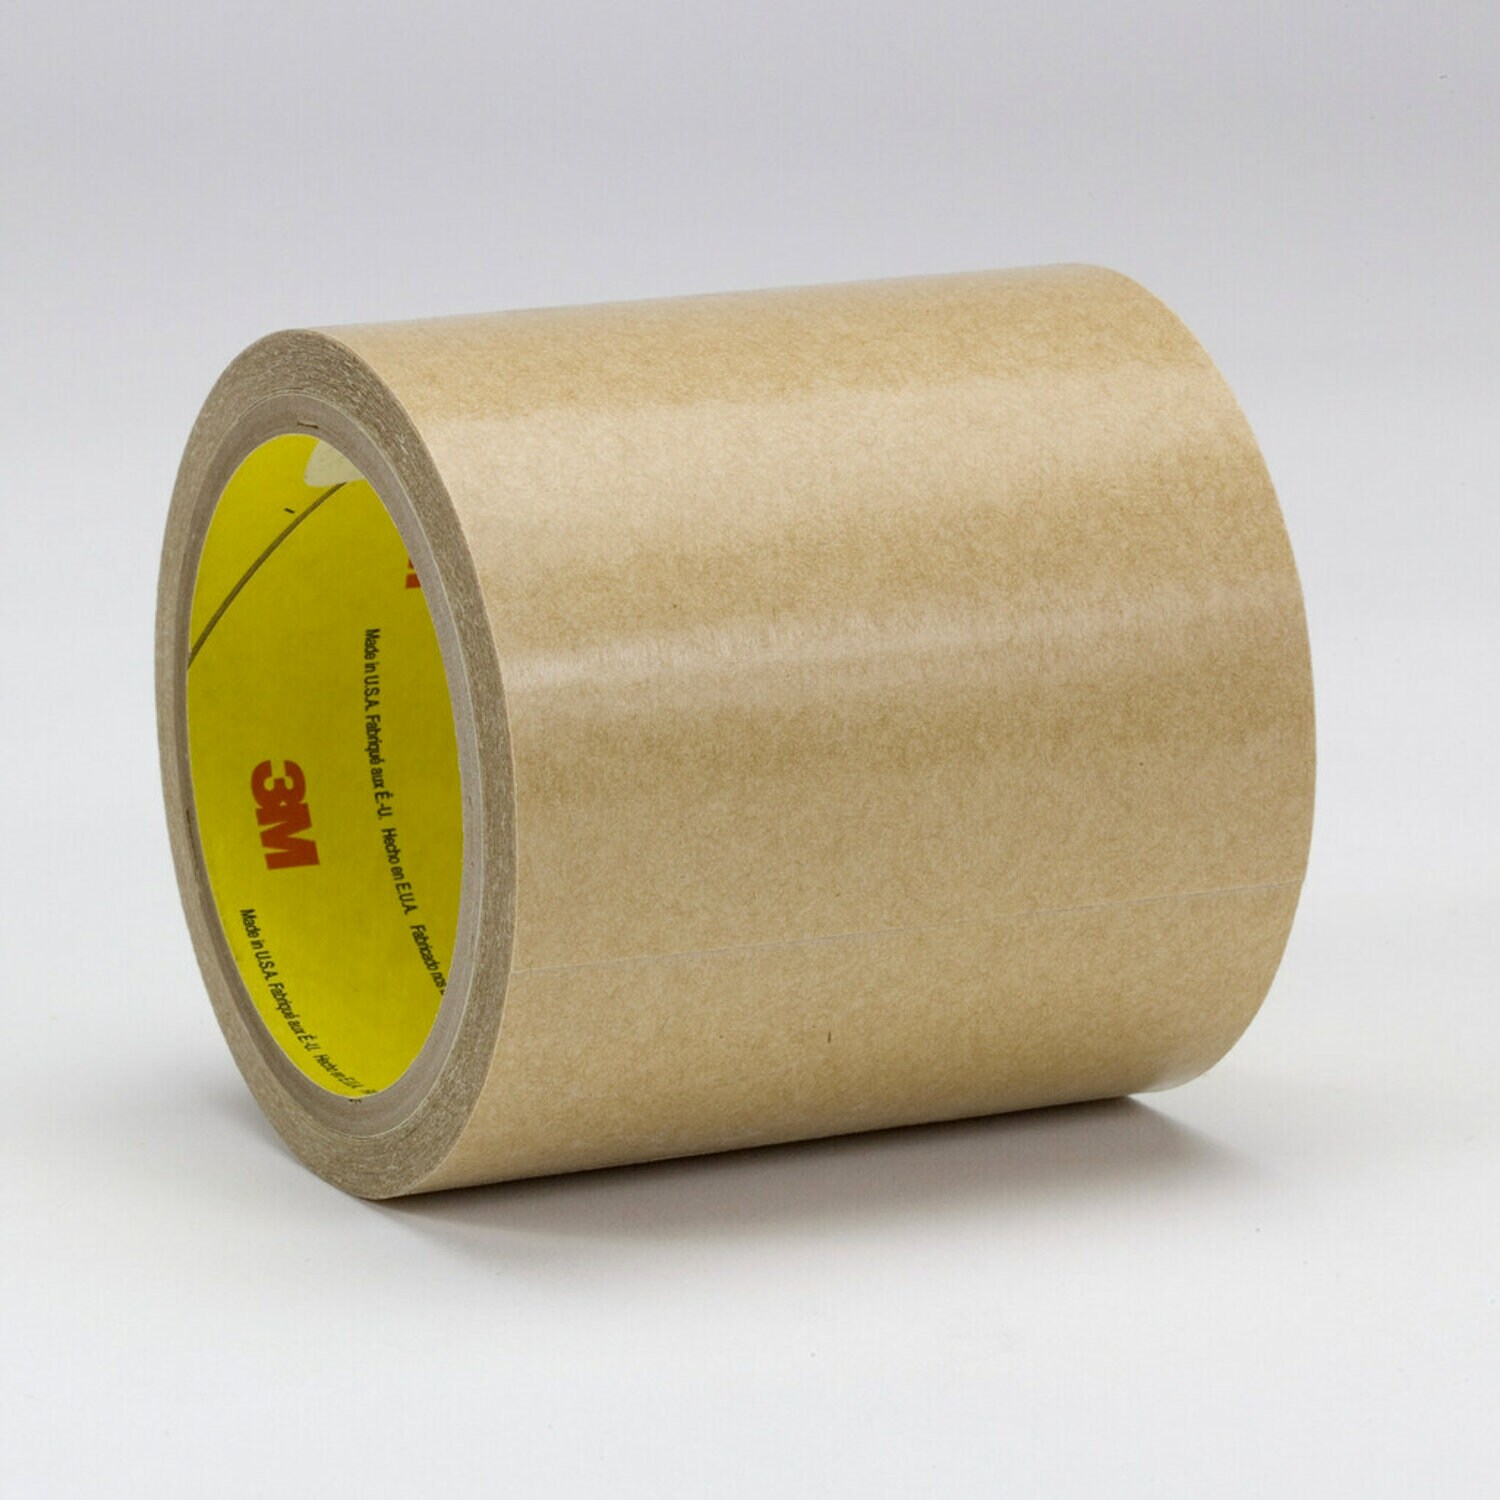 7000048612 - 3M Adhesive Transfer Tape 950, Clear, 36 in x 60 yd, 5 mil, 1 roll per
case